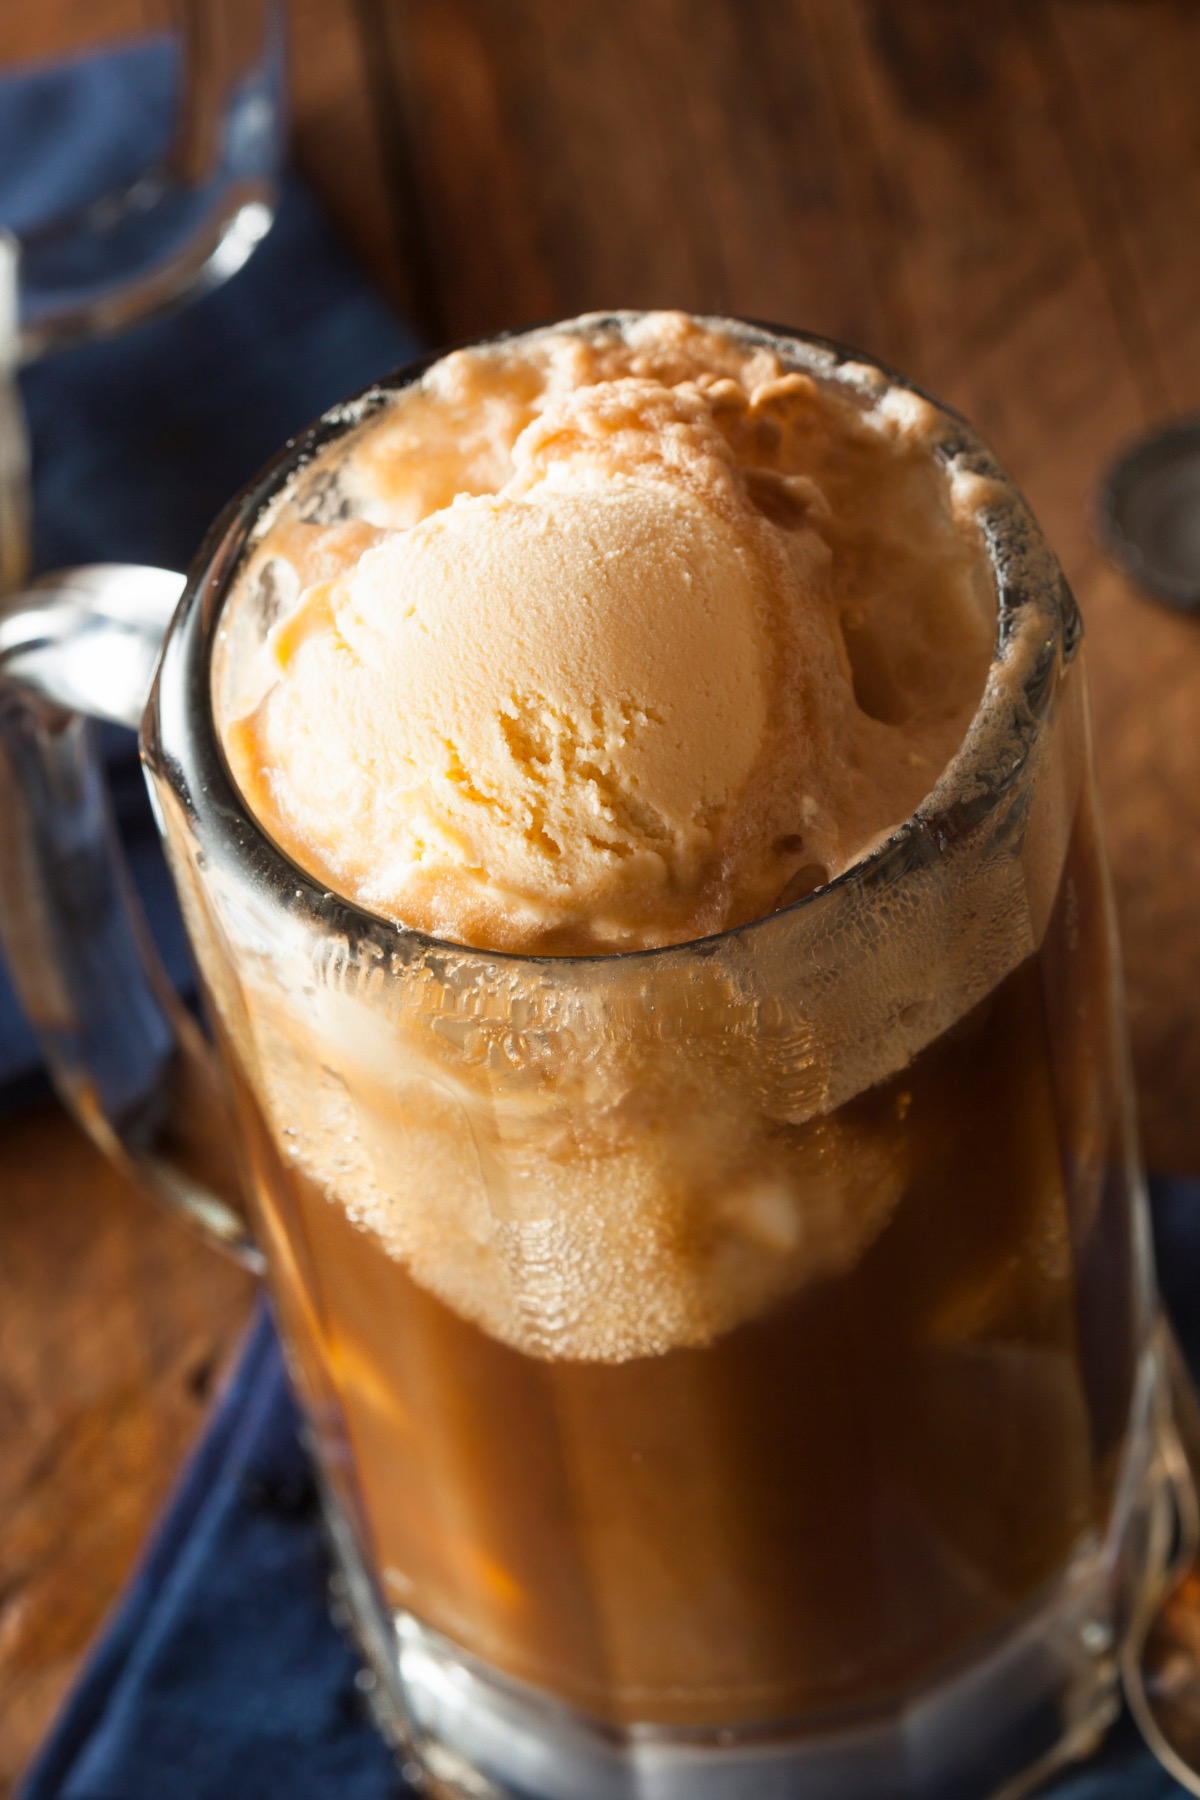 The Ice Cream Float is a classic American drink that takes us right back to the fifties. You won’t believe how easy it is to make your very own coke float at home, with just a few simple ingredients! During the summertime, there’s nothing better than a cold, creamy treat to keep you cool.